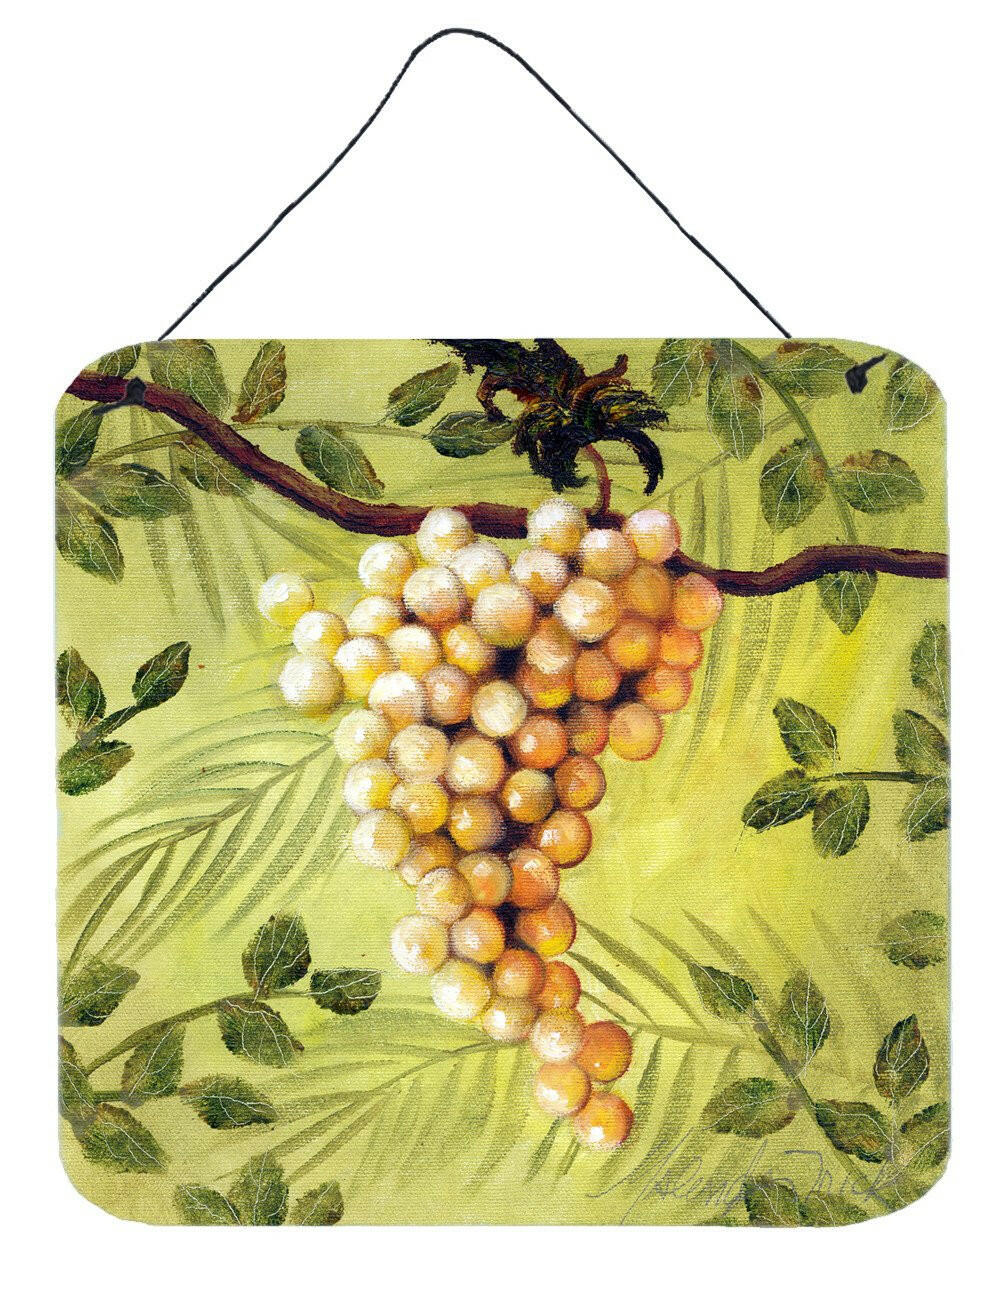 Sunshine White Grapes by Malenda Trick Wall or Door Hanging Prints TMTR0154DS66 by Caroline's Treasures